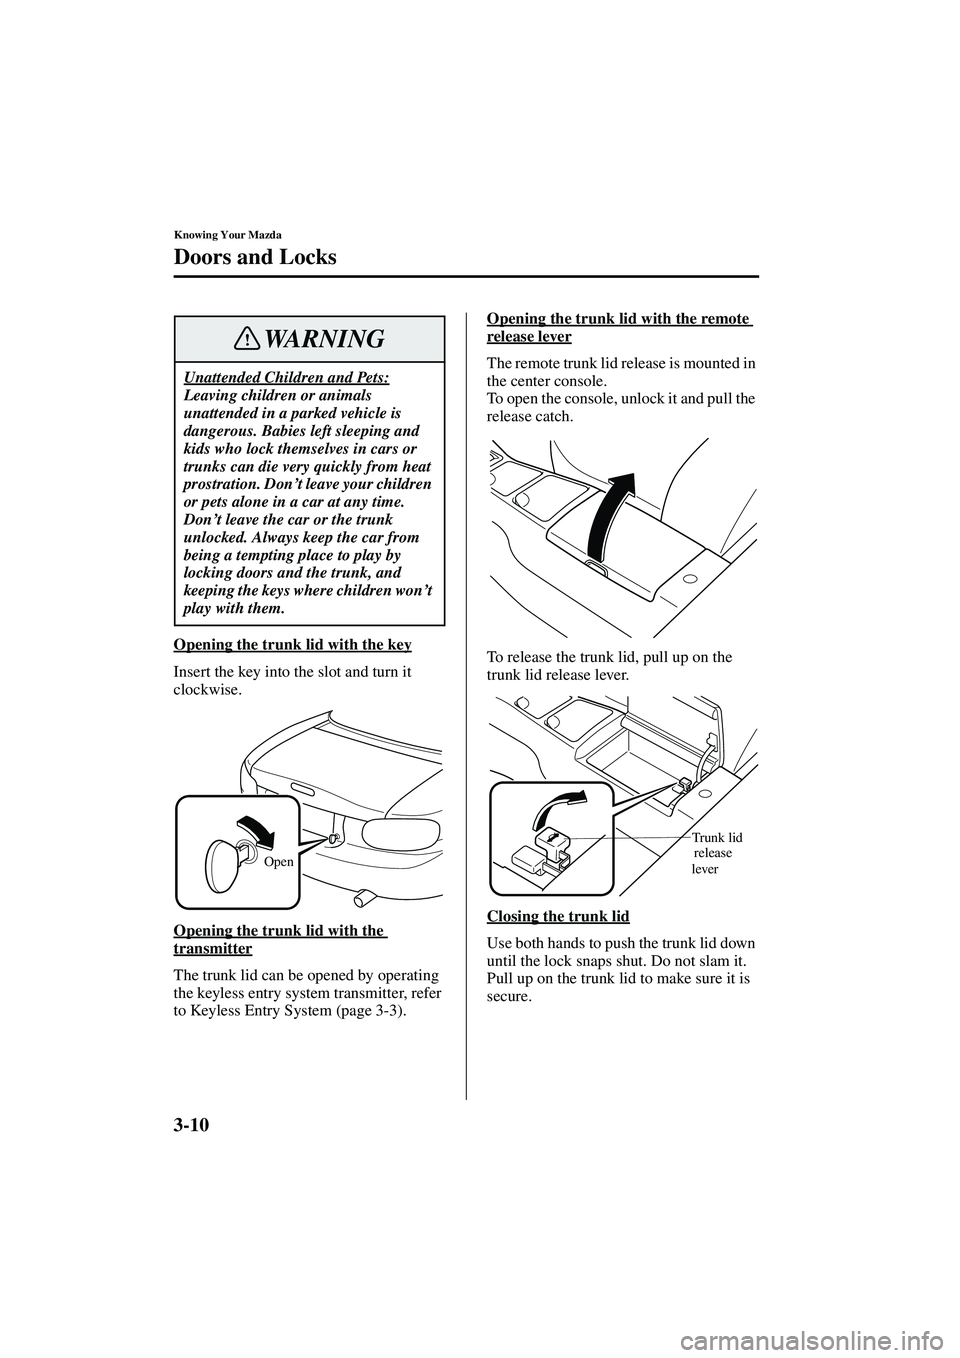 MAZDA MODEL MX-5 MIATA 2003 Service Manual 3-10
Knowing Your Mazda
Doors and Locks
Form No. 8R09-EA-02G
Opening the trunk lid with the key
Insert the key into the slot and turn it 
clockwise.
Opening the trunk lid with the 
transmitter
The tru